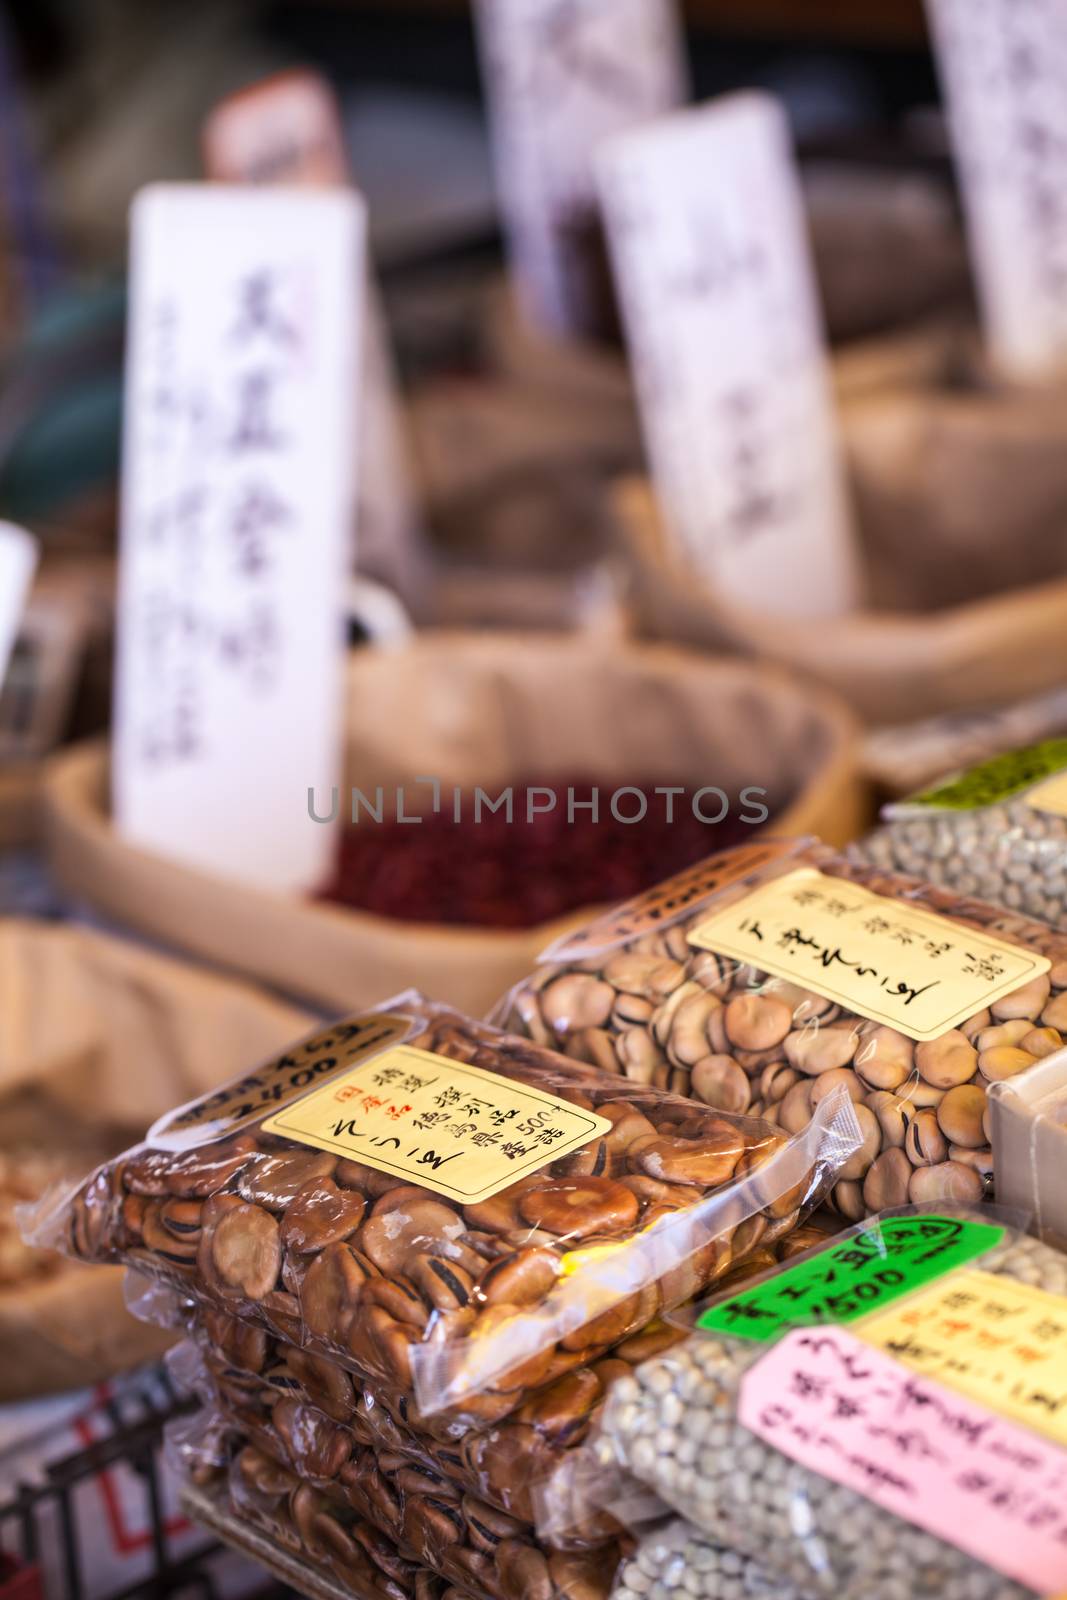 Exotic foods on display in traditional market in Japan. by mariusz_prusaczyk